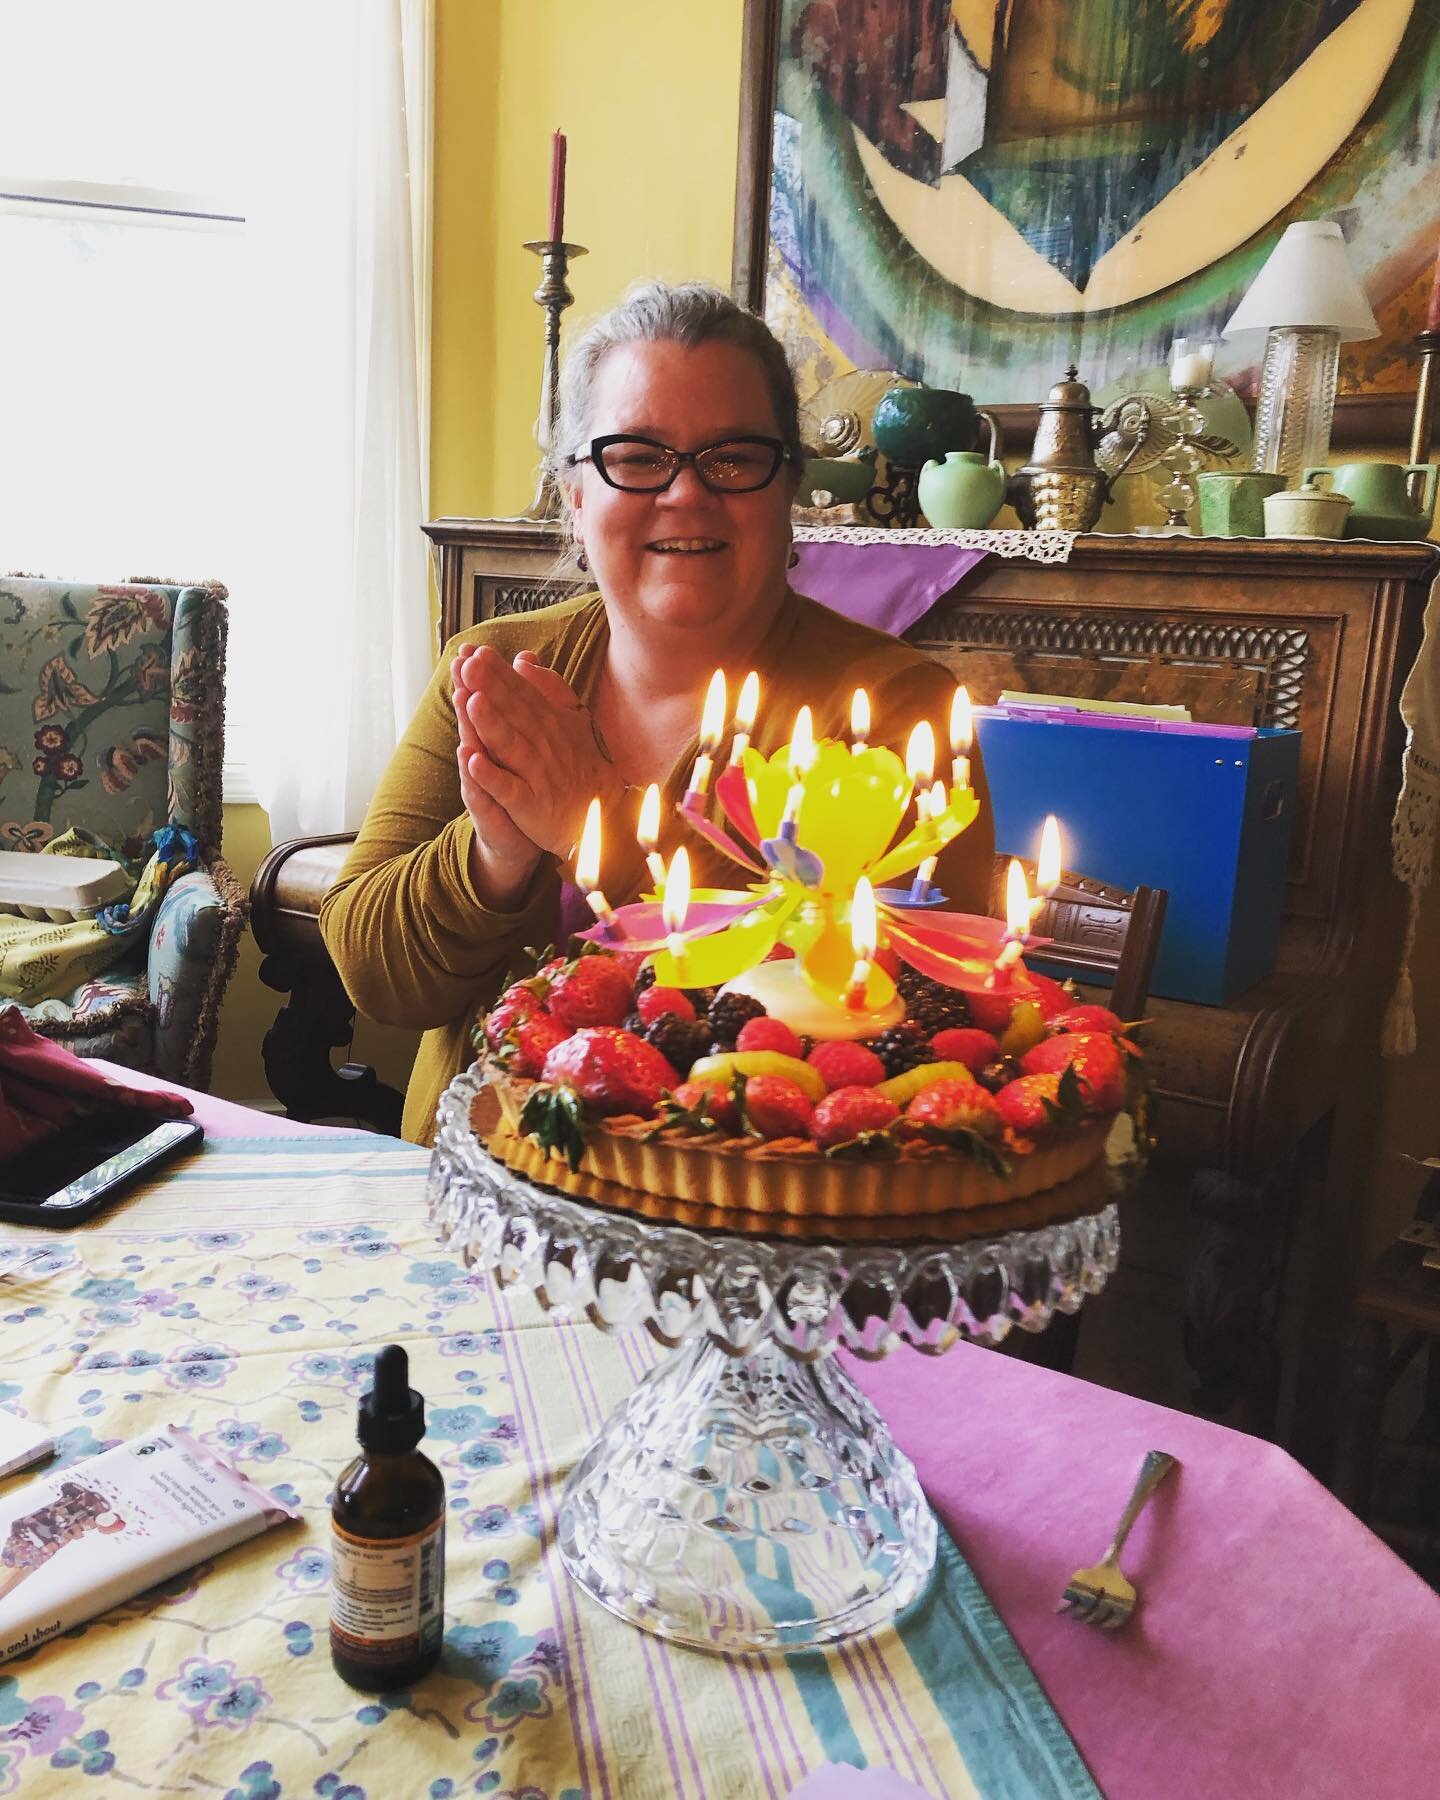 Happy birthday to our dearest Midwife Lesley!! You are so appreciate and loved. We take birthdays very seriously here at Birthstream Midwifery Service, as you can tell by her birthday candles.

#midwifelife #happybirthday #midwivesrock #californiamid